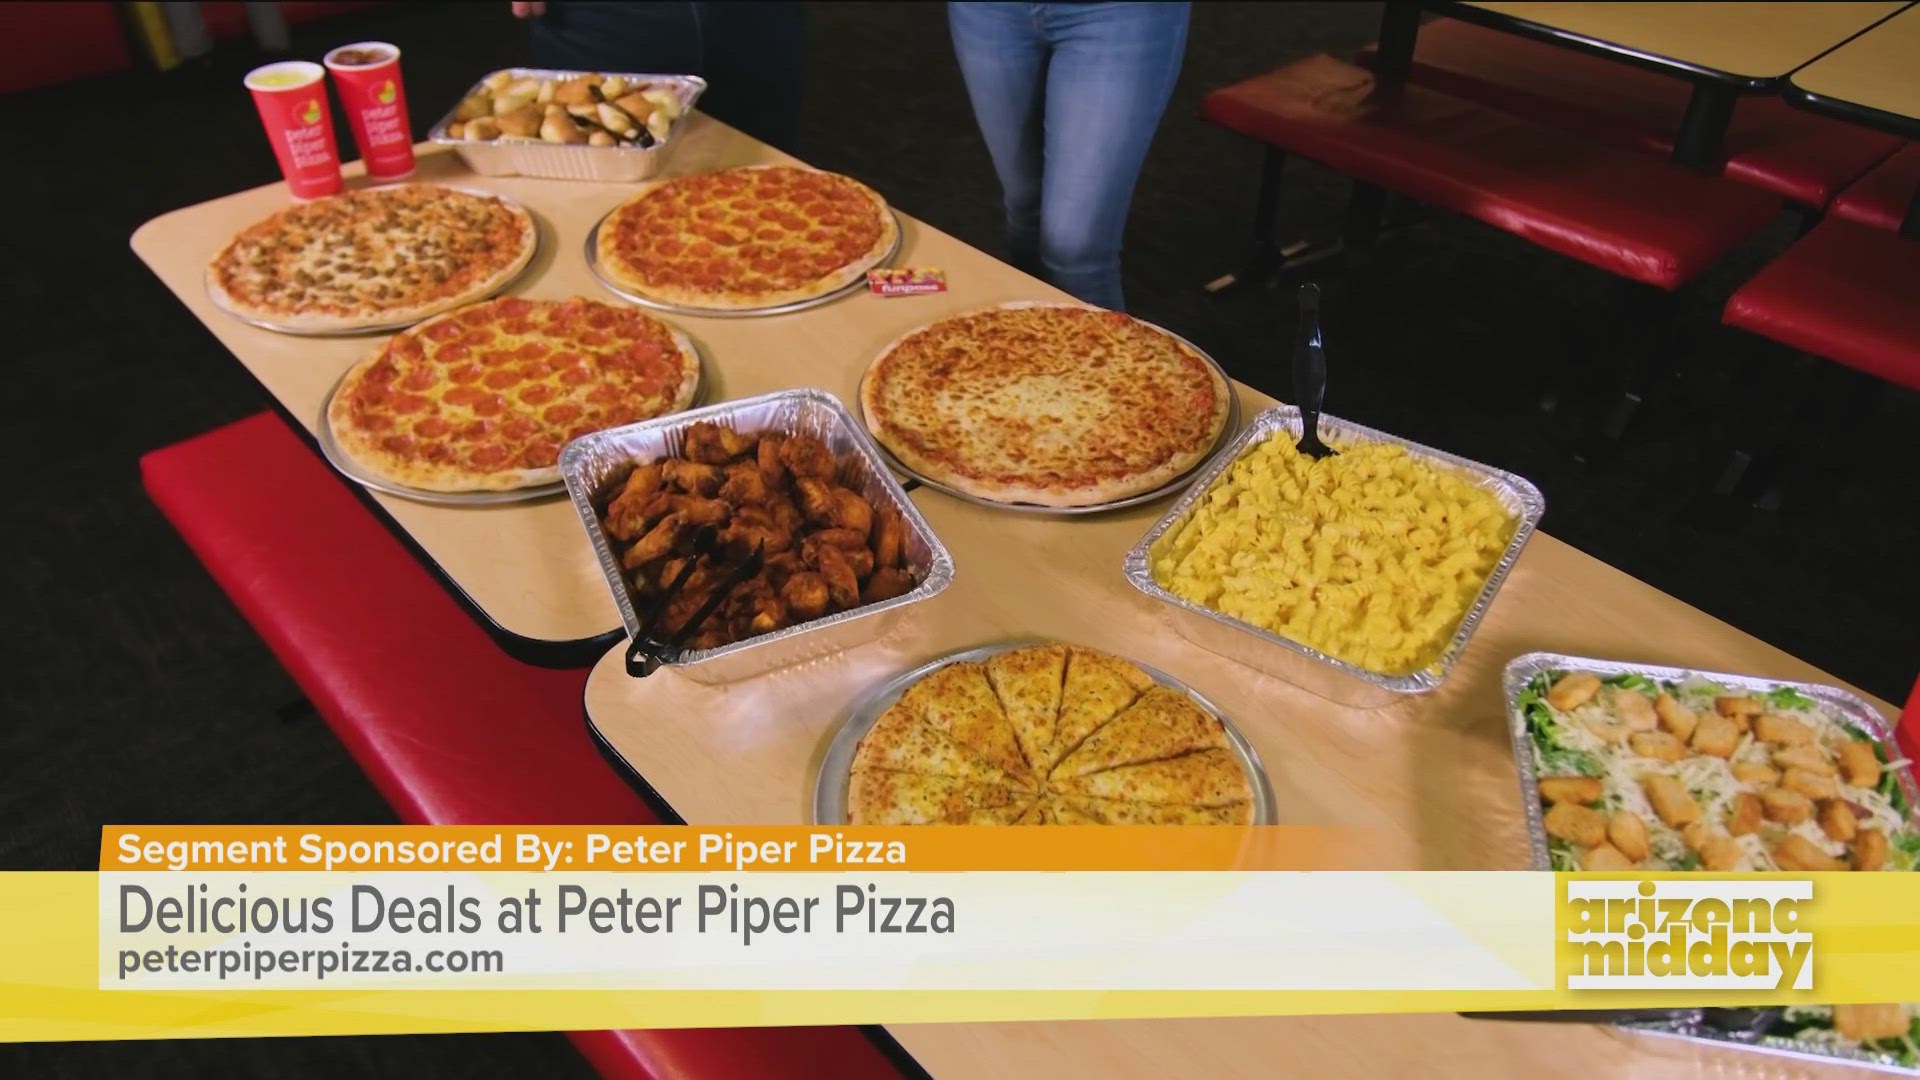 Peter Piper Pizza shows us all of the different ways you can enjoy a fresh pie and have a fun time with the family!